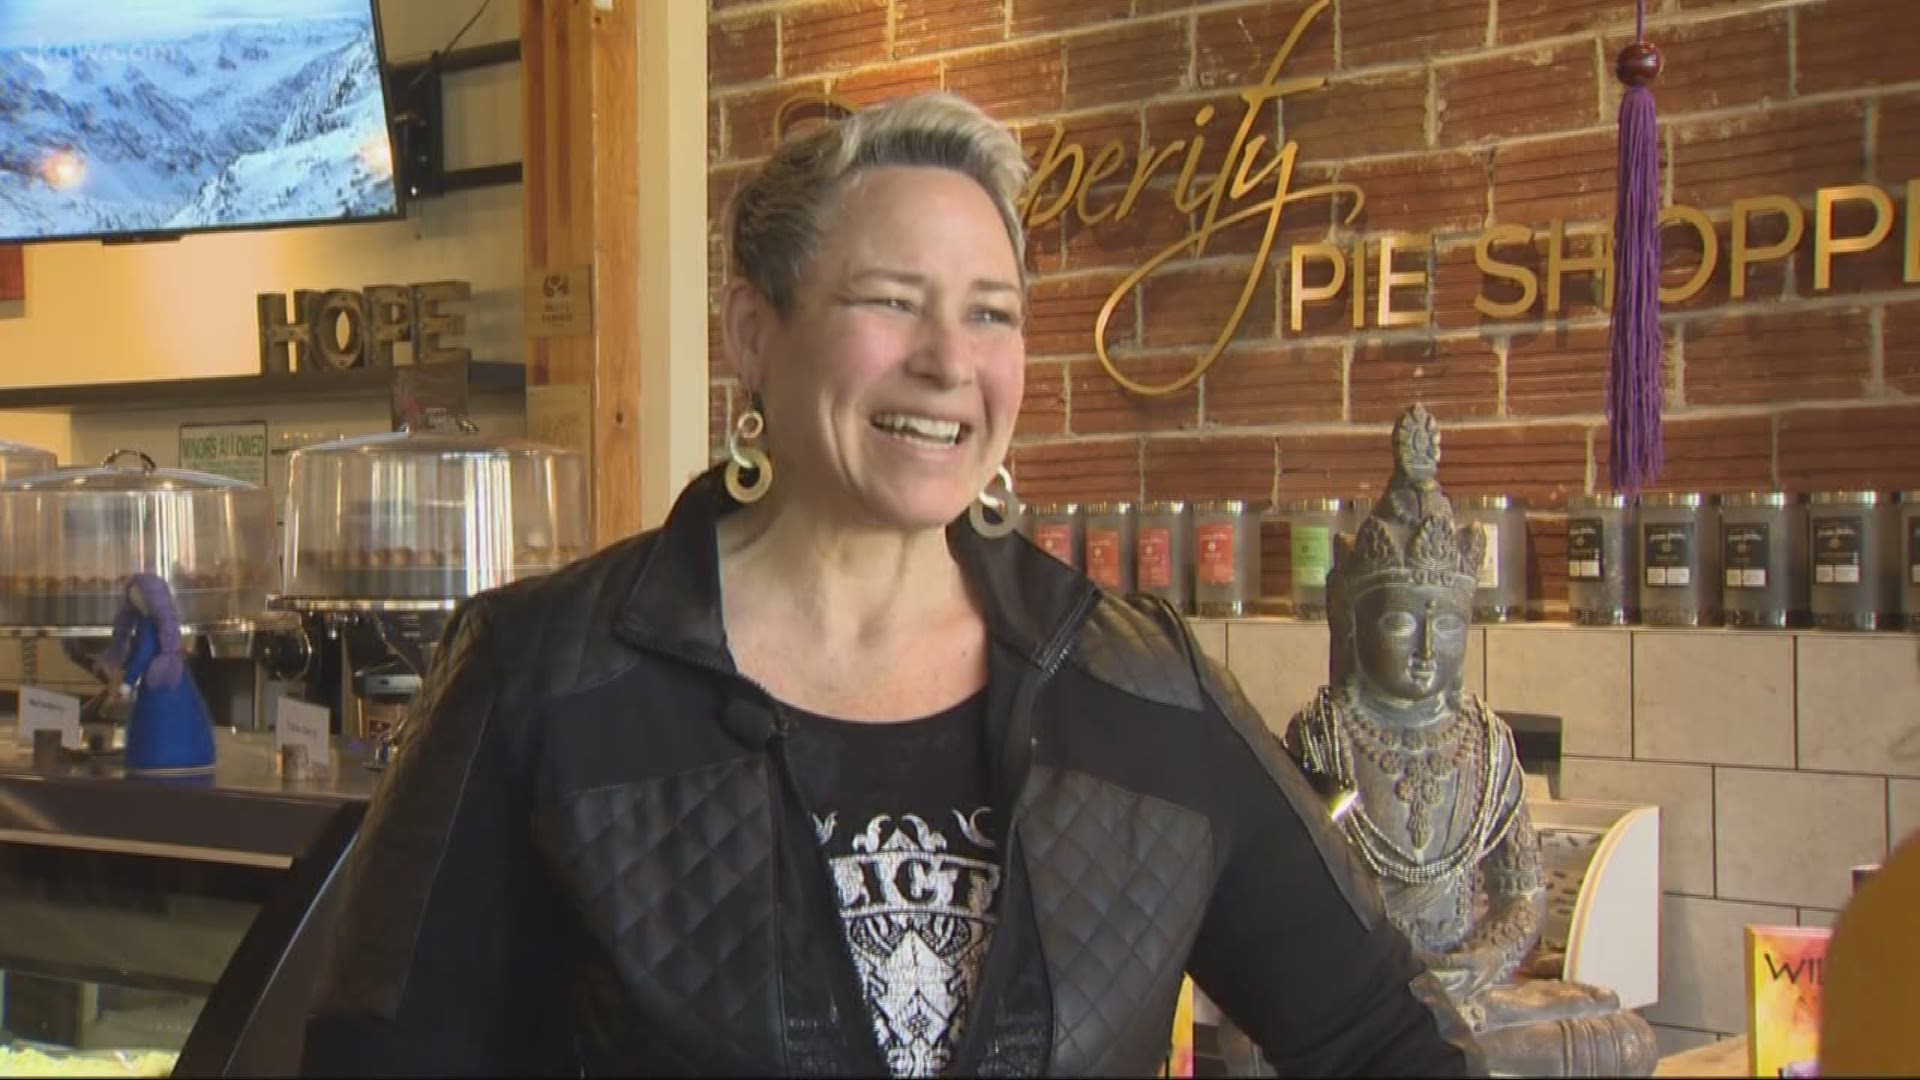 Now to a sweet story of a small business, Prosperity Pie, making a big comeback after a fire closed down its shop in Multnomah Village.